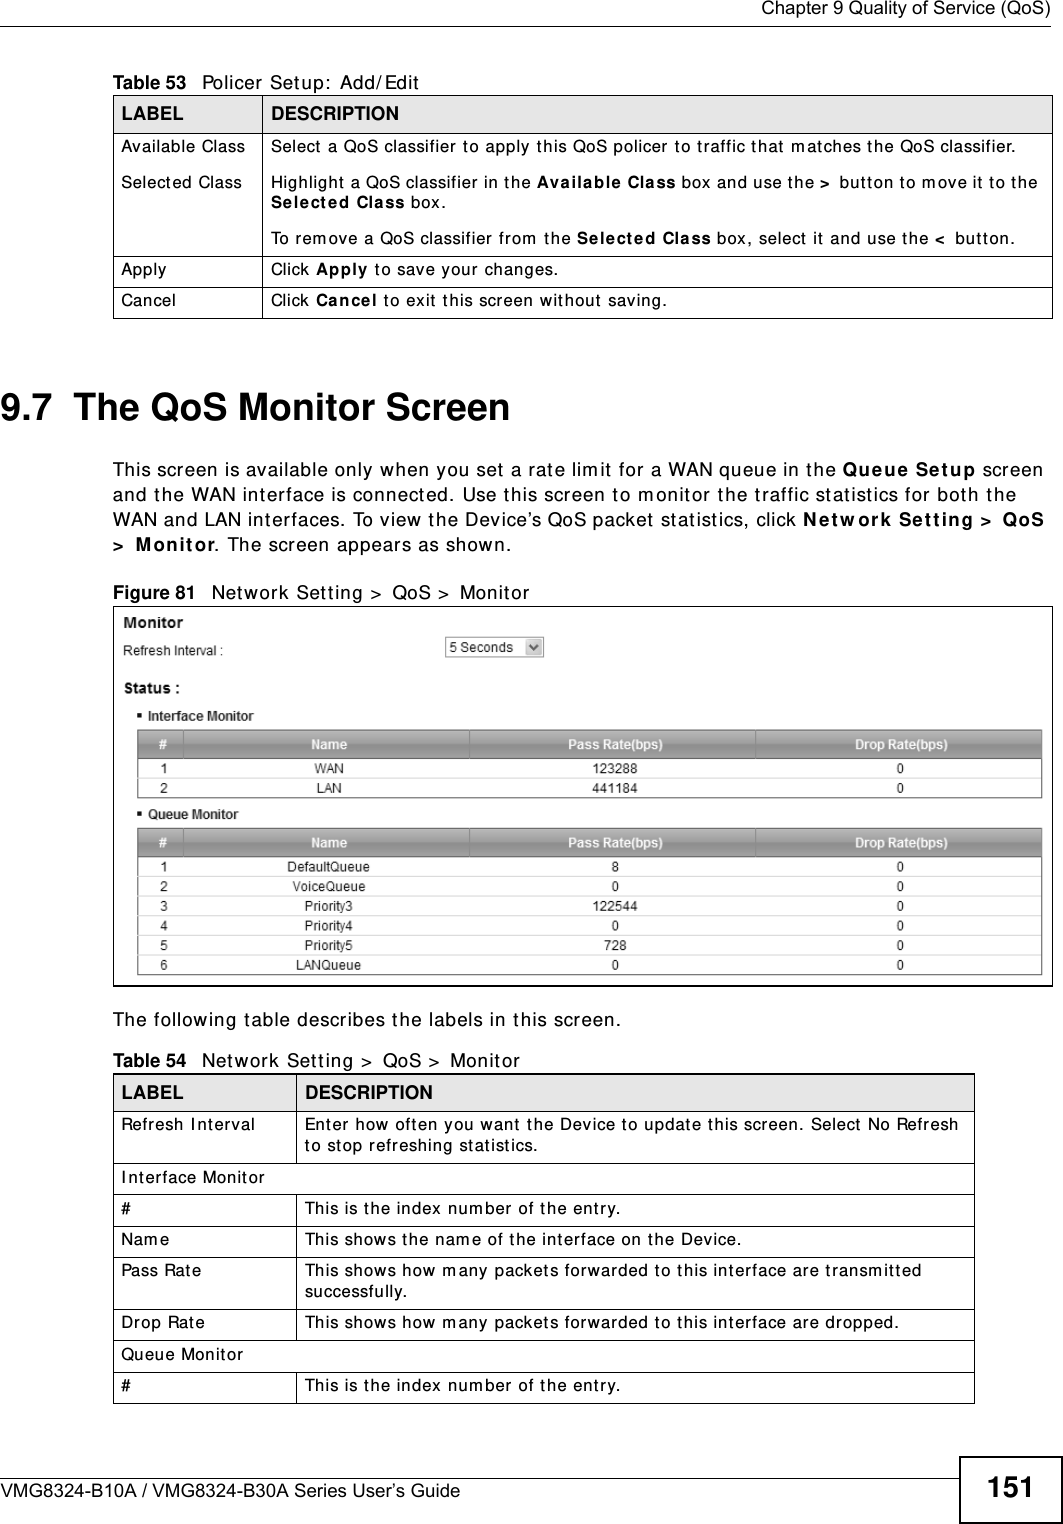  Chapter 9 Quality of Service (QoS)VMG8324-B10A / VMG8324-B30A Series User’s Guide 1519.7  The QoS Monitor Screen This screen is available only when you set a rat e lim it  for a WAN queue in t he Qu e u e  Se t up screen and t he WAN int erface is connect ed. Use t his scr een to m onit or t he t raffic st atist ics for both t he WAN and LAN int erfaces. To view t he Device’s QoS packet stat ist ics, click N e t w or k  Se t t ing &gt;  QoS &gt; M onit or. The screen appears as shown. Figure 81   Net work Set t ing &gt;  QoS &gt;  Monit or The following t able describes t he labels in this screen.  Available ClassSelected Class Select  a QoS classifier t o apply this QoS policer t o t raffic t hat  m at ches the QoS classifier.Highlight  a QoS classifier in the Availa ble Cla ss box and use the &gt; b u t t on  t o m ove it  t o t h e Select ed Cla ss box.To rem ove a QoS classifier  from  t he Select ed Cla ss box, select it  and use the &lt; but t on.Apply Click Apply to save your changes.Cancel Click Cance l t o exit  t his screen wit hout saving.Table 53   Policer Set up:  Add/ EditLABEL DESCRIPTIONTable 54   Net work Sett ing &gt;  QoS &gt;  Monit orLABEL DESCRIPTIONRefresh I nt erval Ent er how oft en you want  t he Device t o updat e t his screen. Select  No Refresh to st op refreshing st at ist ics.I nterface Monitor# This is t he index num ber of t he entry.Nam e This shows t he nam e of t he interface on t he Device. Pass Rat e This shows how  m any  packet s forwarded t o t his int erface are transm itted successfully.Drop Rat e This shows how m any packet s for warded t o t his int erface are dropped.Queue Monit or# This is t he index num ber of t he entry.